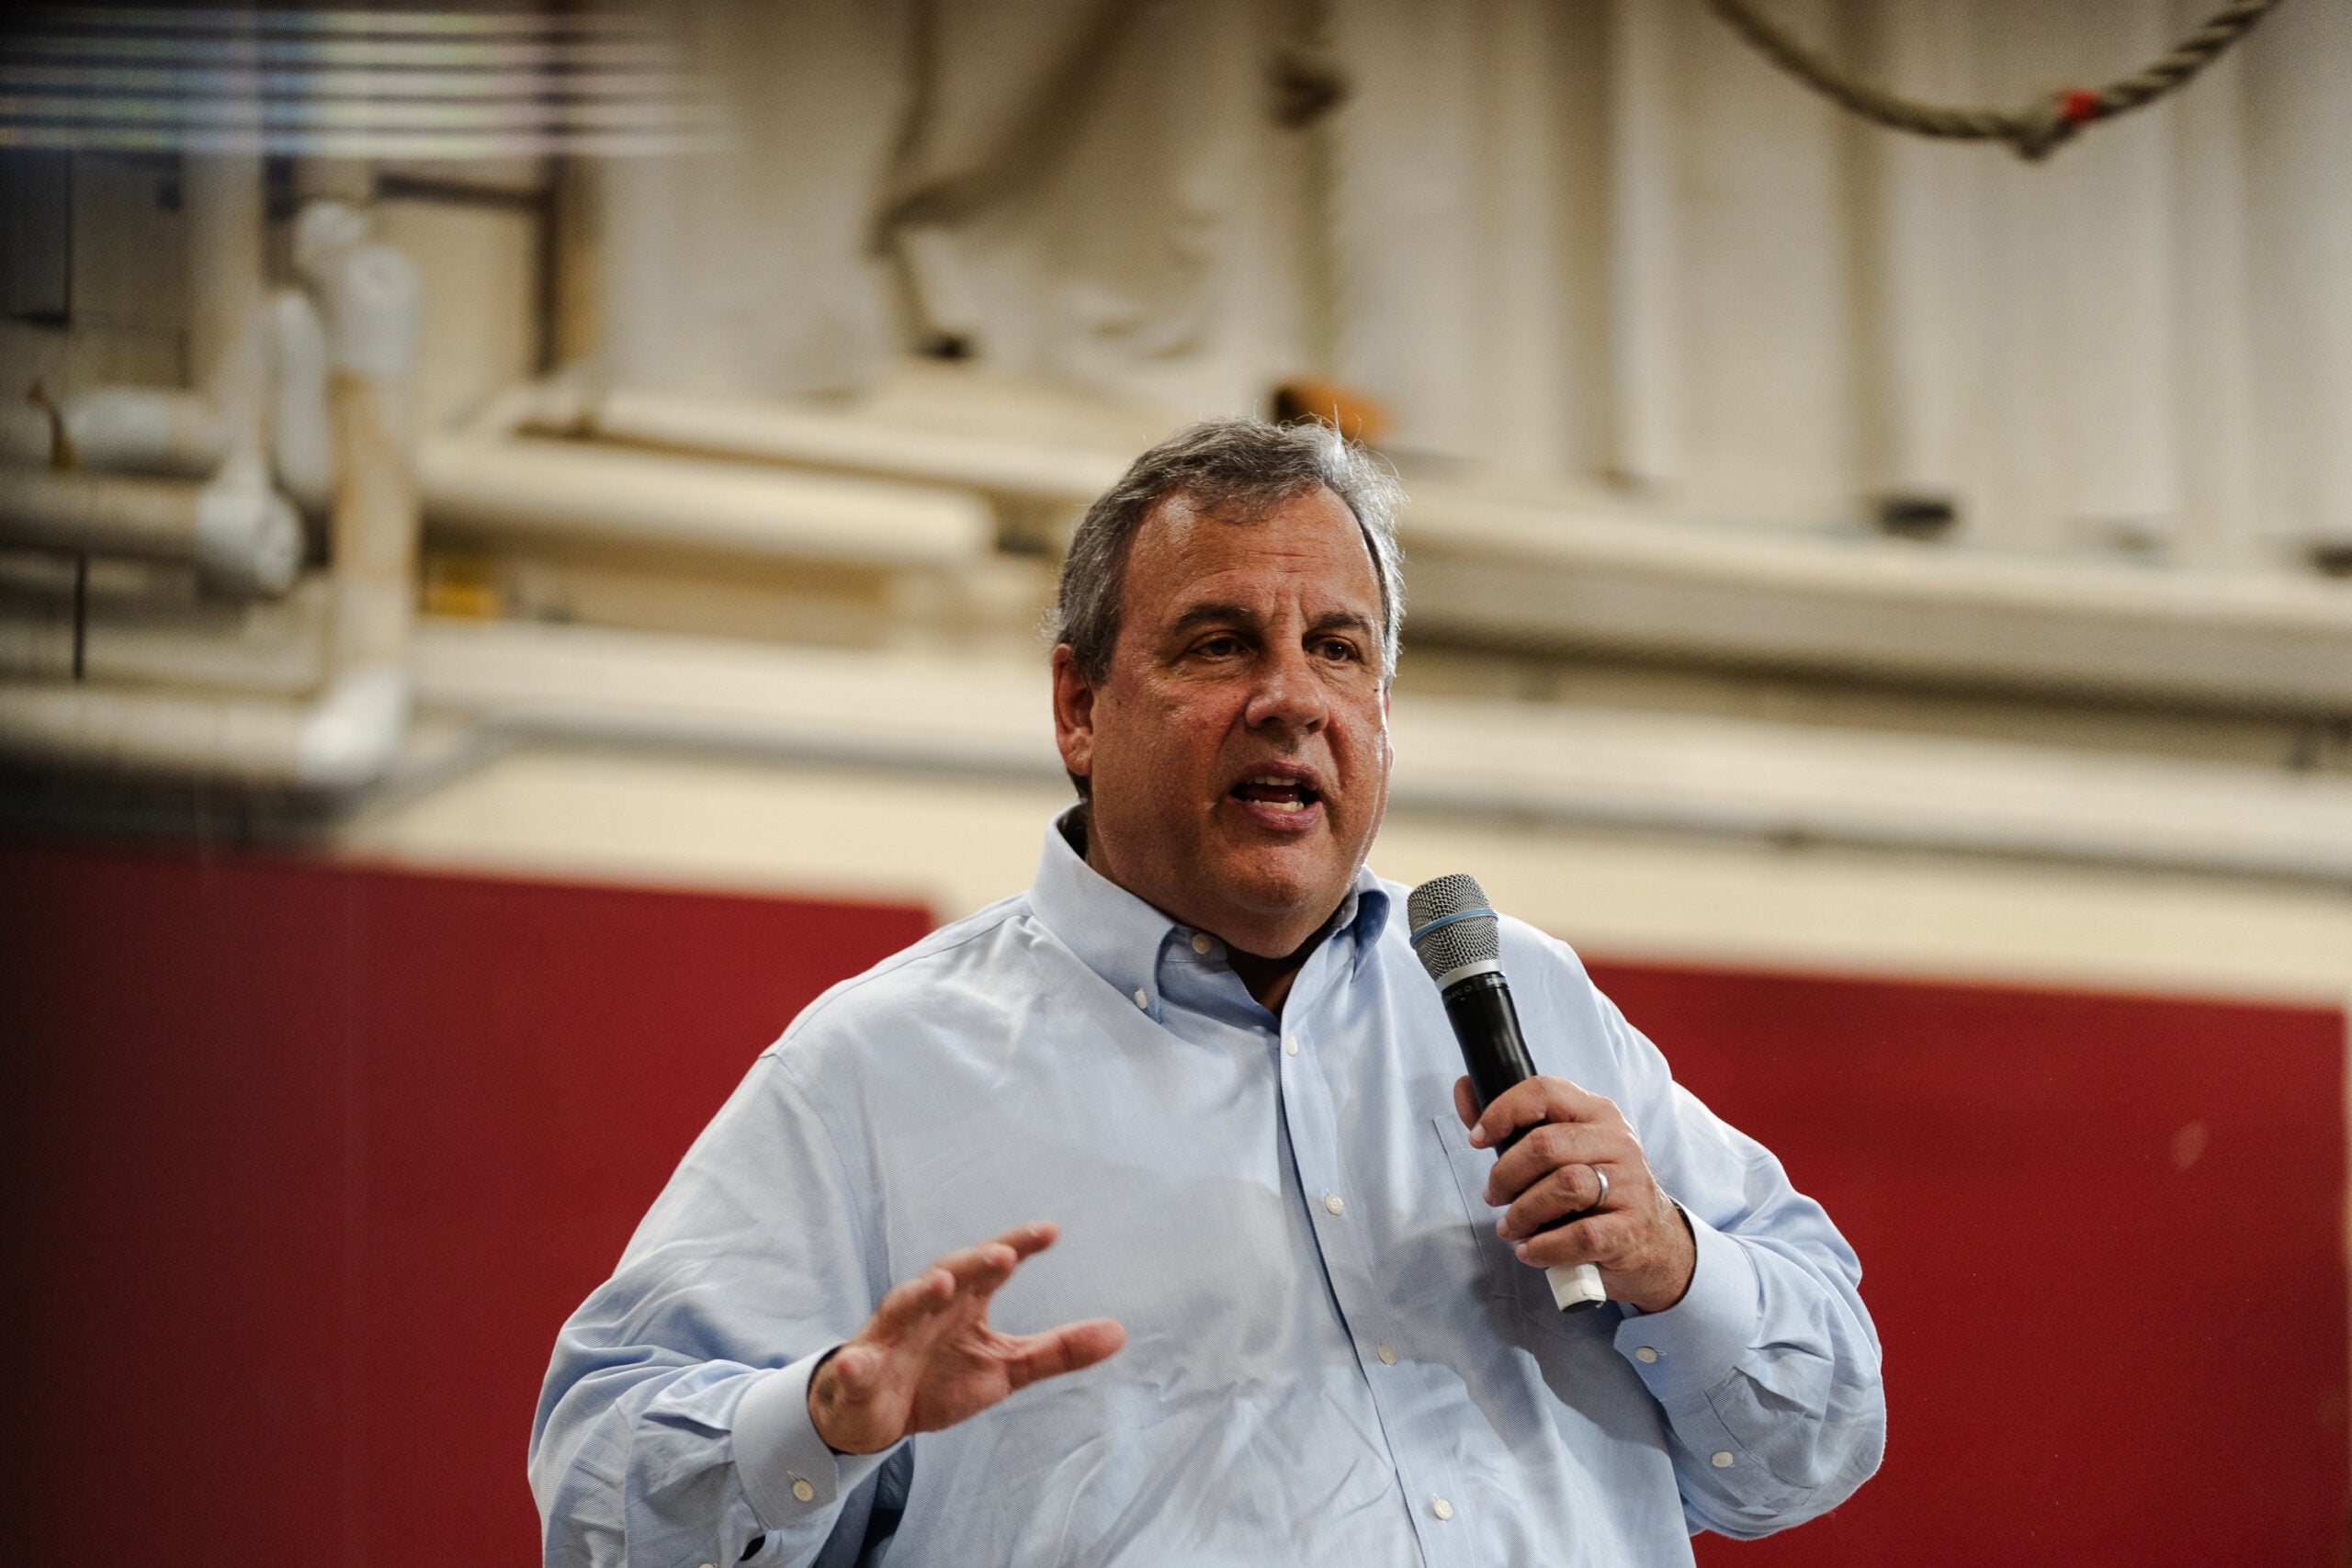 Chris Christie, a Republican presidential candidate, speaks at a town hall in Bedford, N.H.